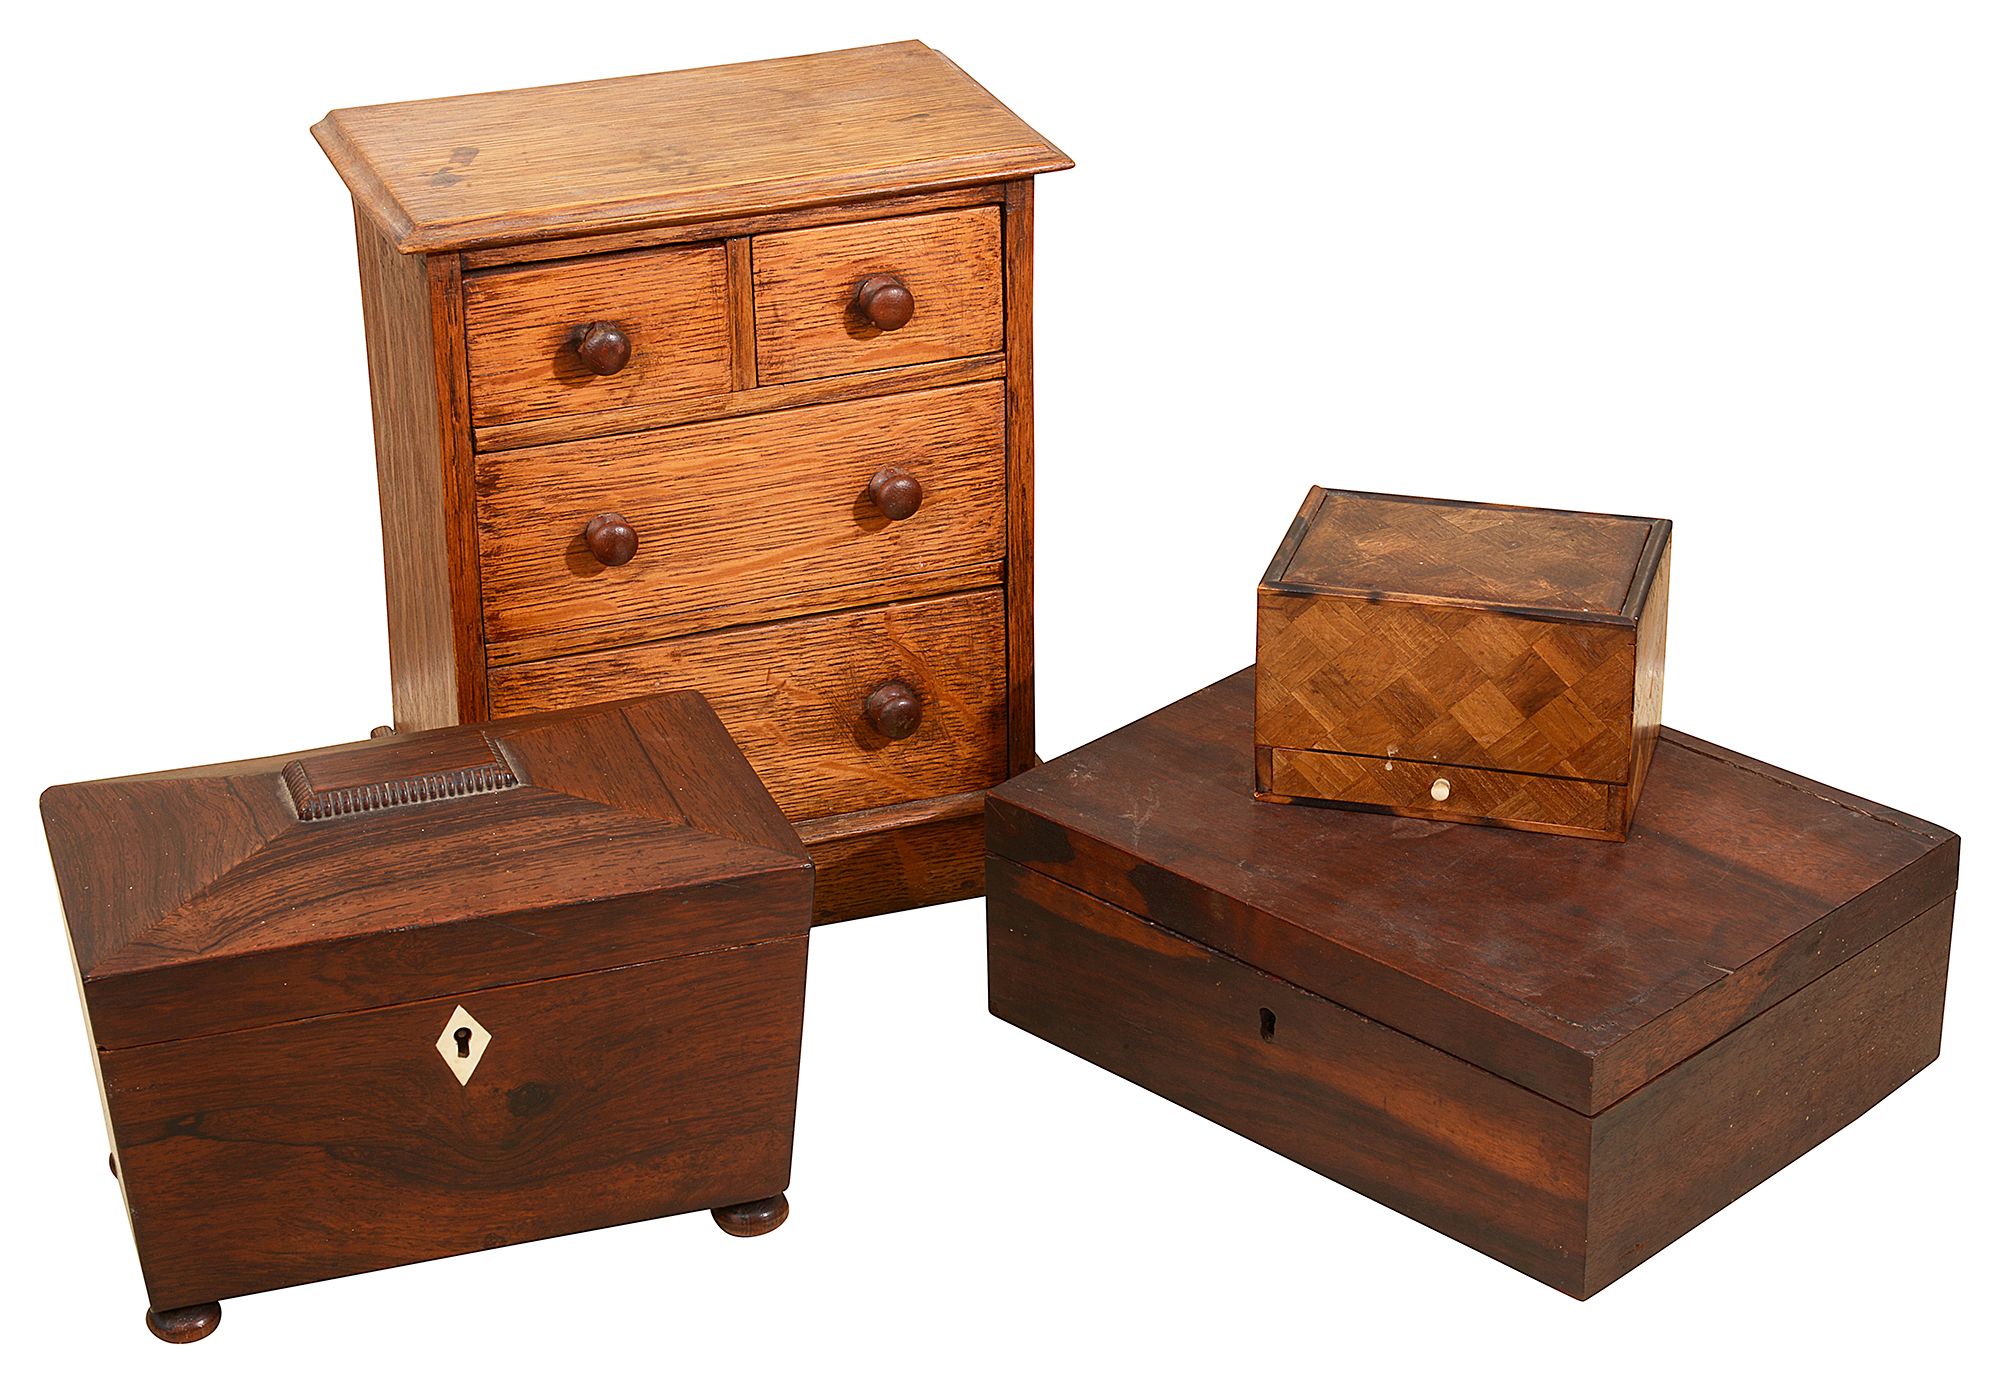 A Regency rosewood sarcophagus tea caddy, an oak tabletop chest of drawers and other boxes